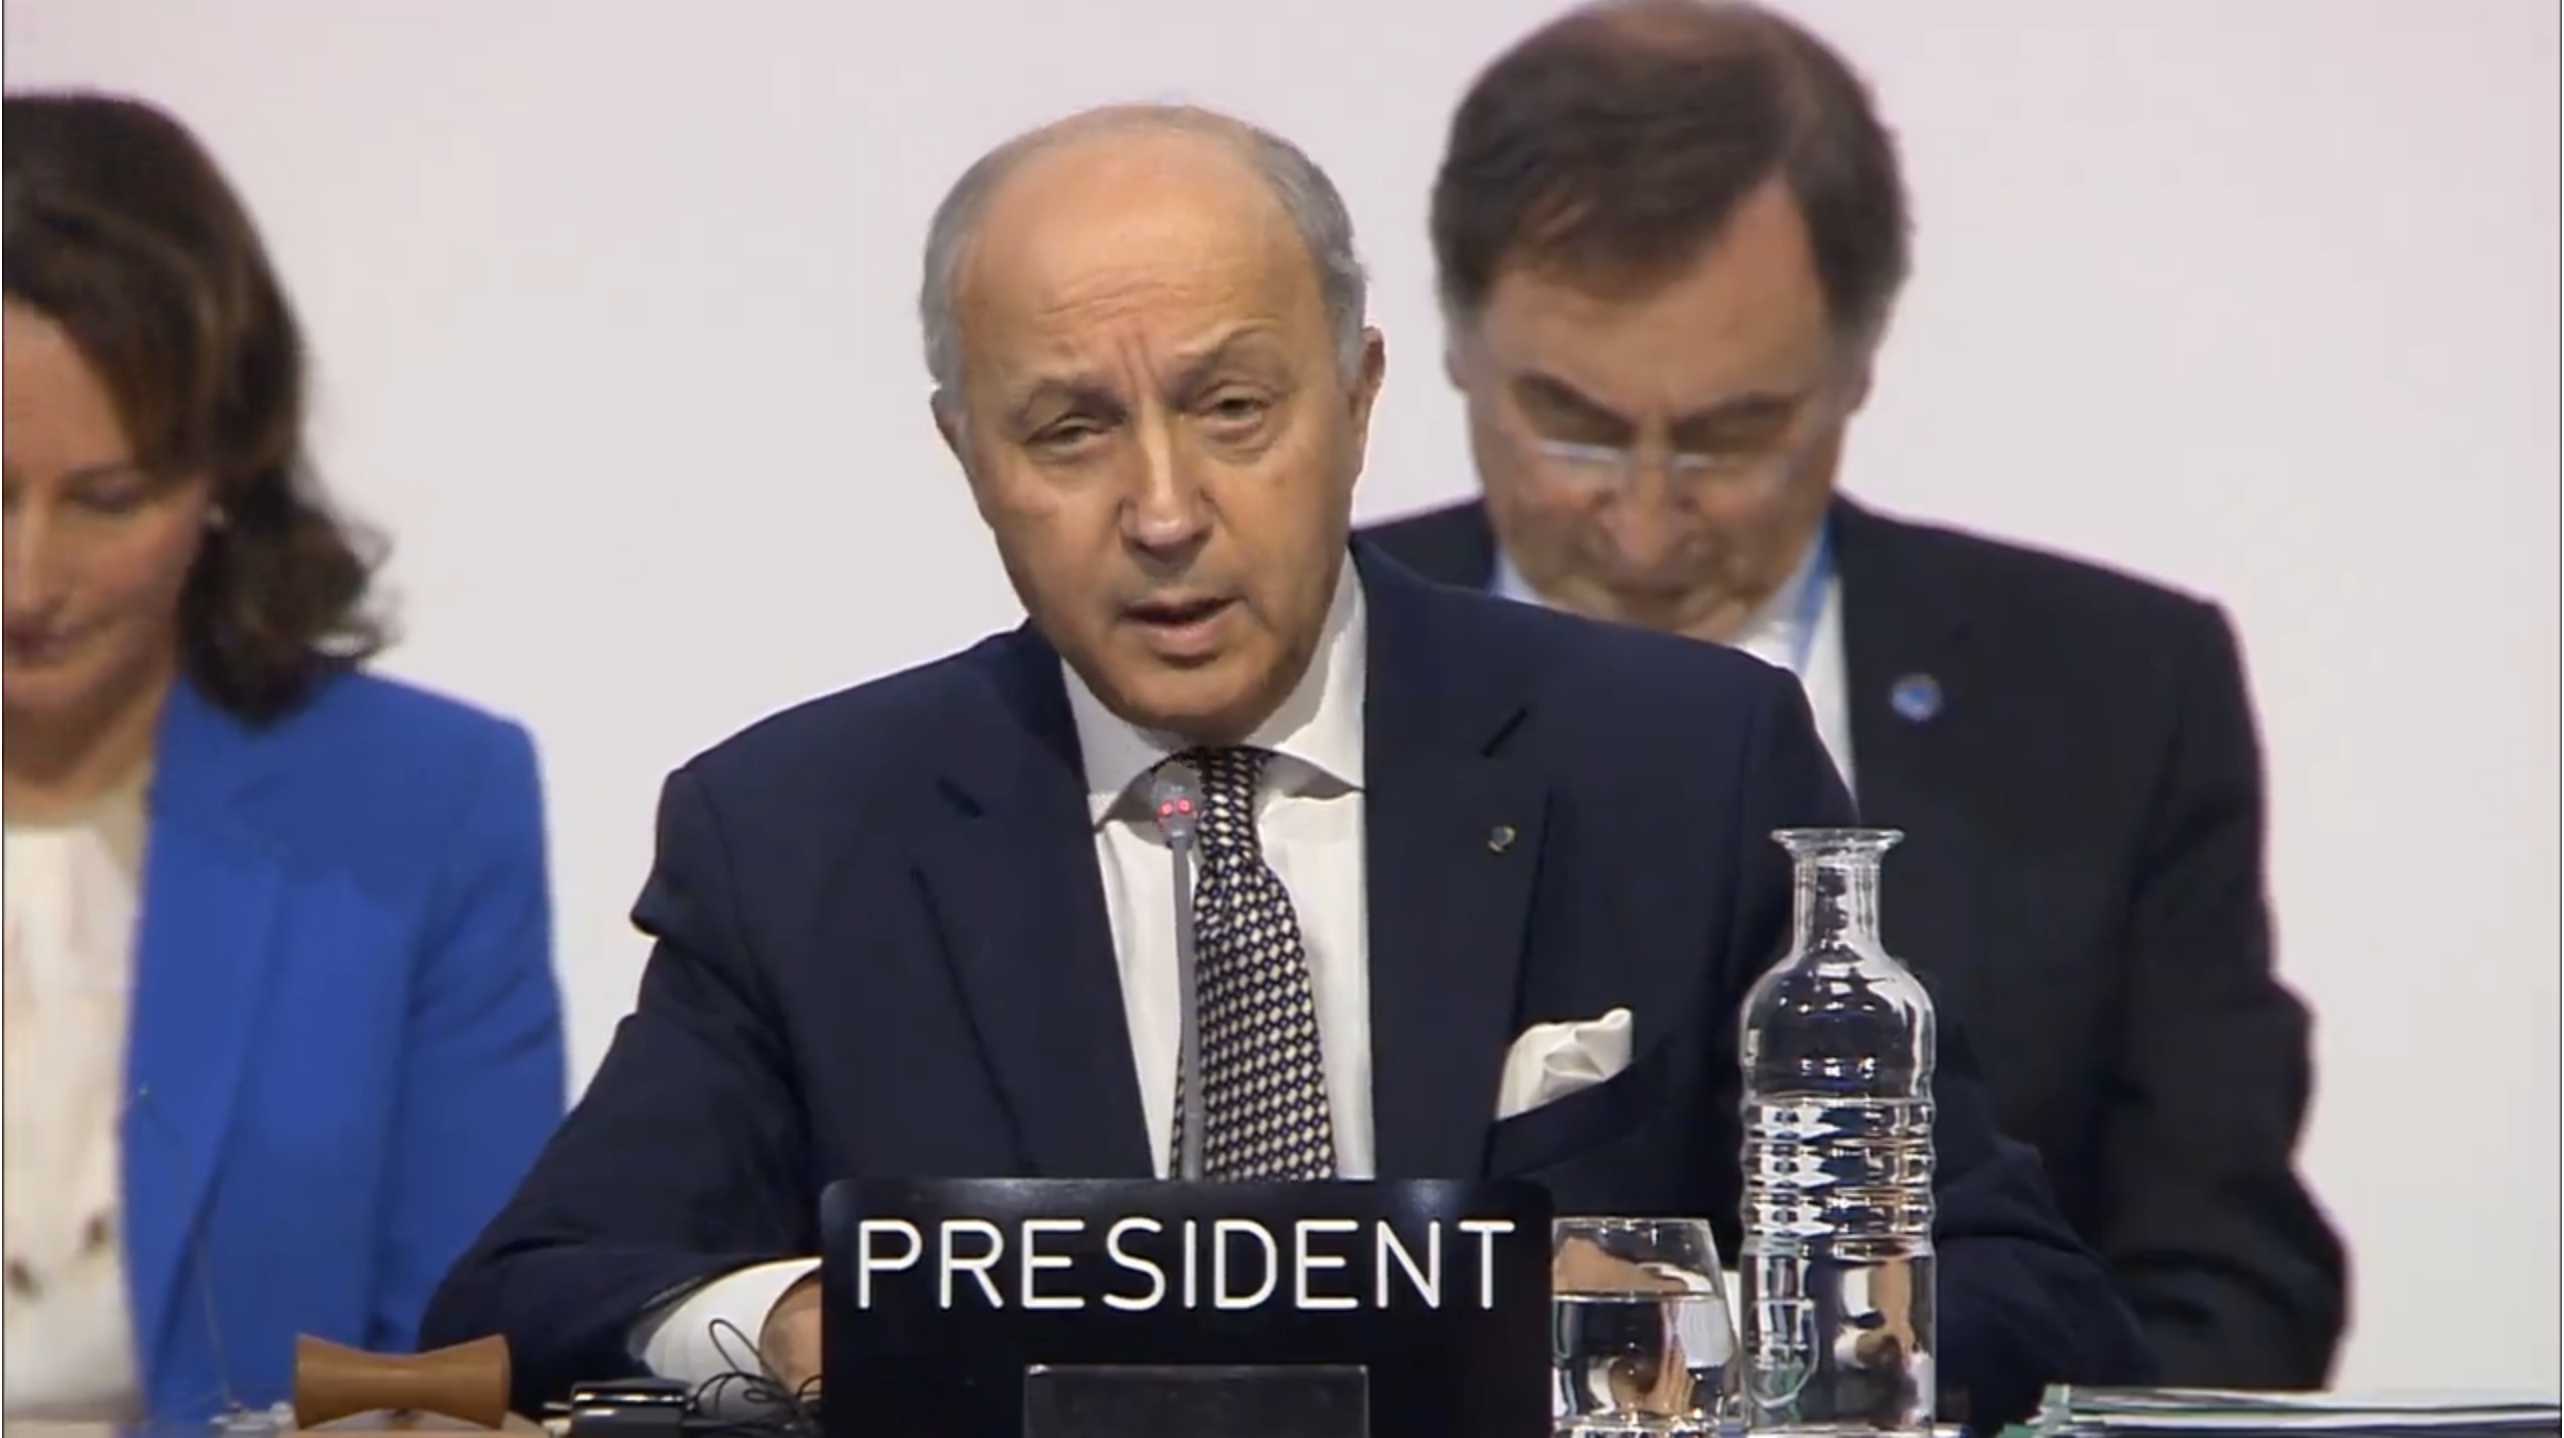 French Foreign Minister Laurent Fabius delivers a speech at the Comité de Paris plenary session during the UN climate change conference in Le Bourget, France, December 12, 2015. Framegrab from UNFCCC 